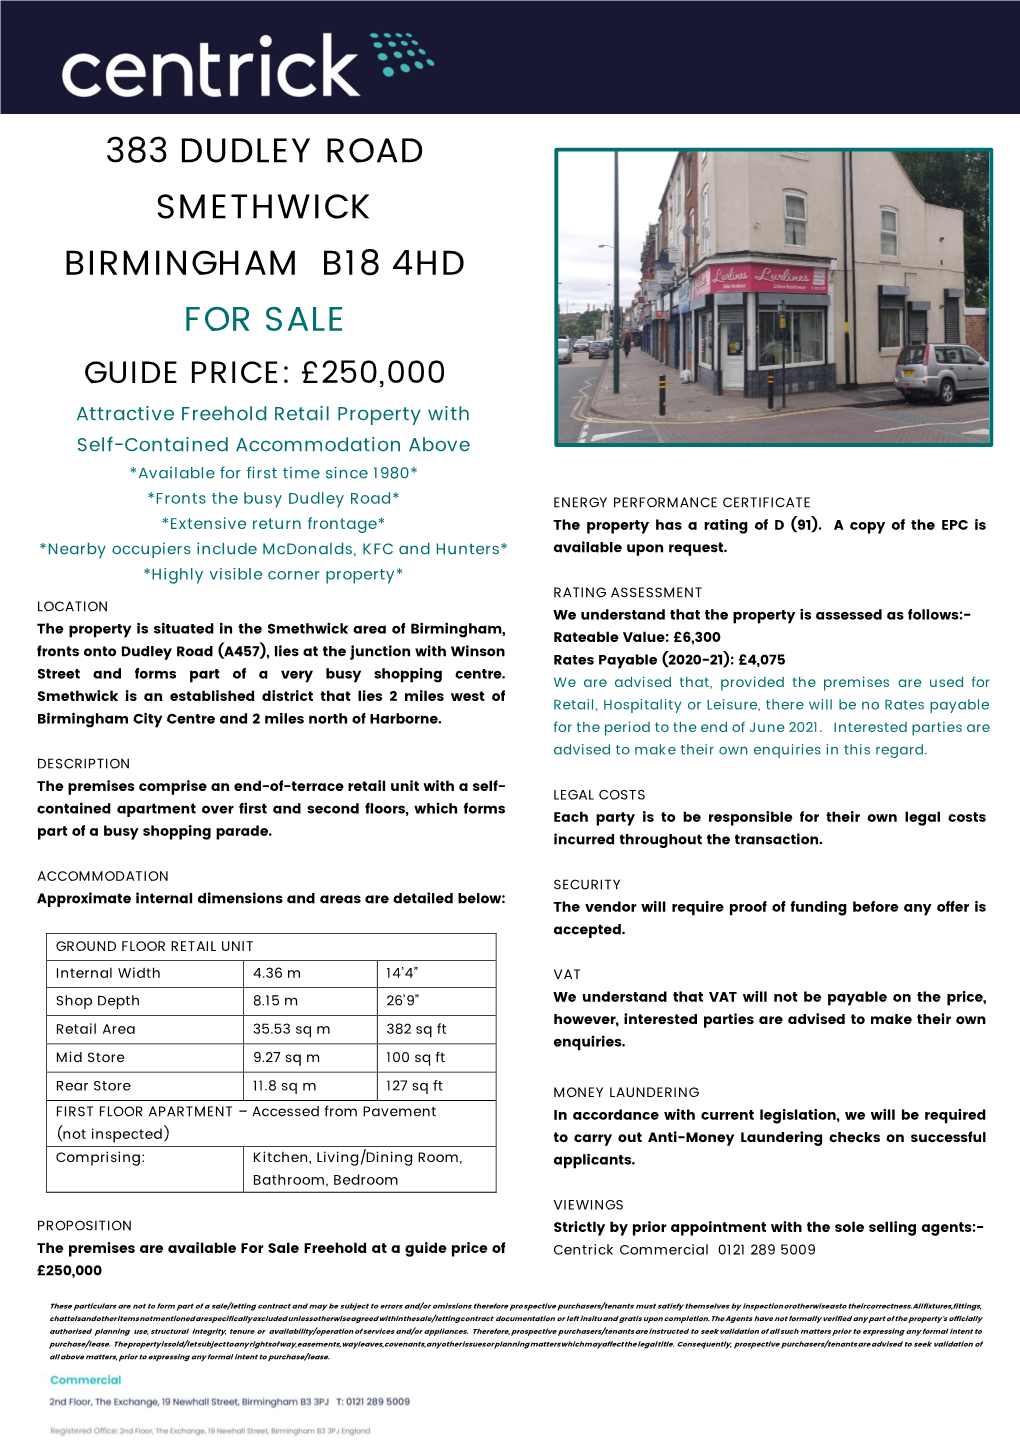 383 DUDLEY ROAD SMETHWICK BIRMINGHAM B18 4HD for SALE GUIDE PRICE: £250,000 Attractive Freehold Retail Property with Self-Contained Accommodation Above